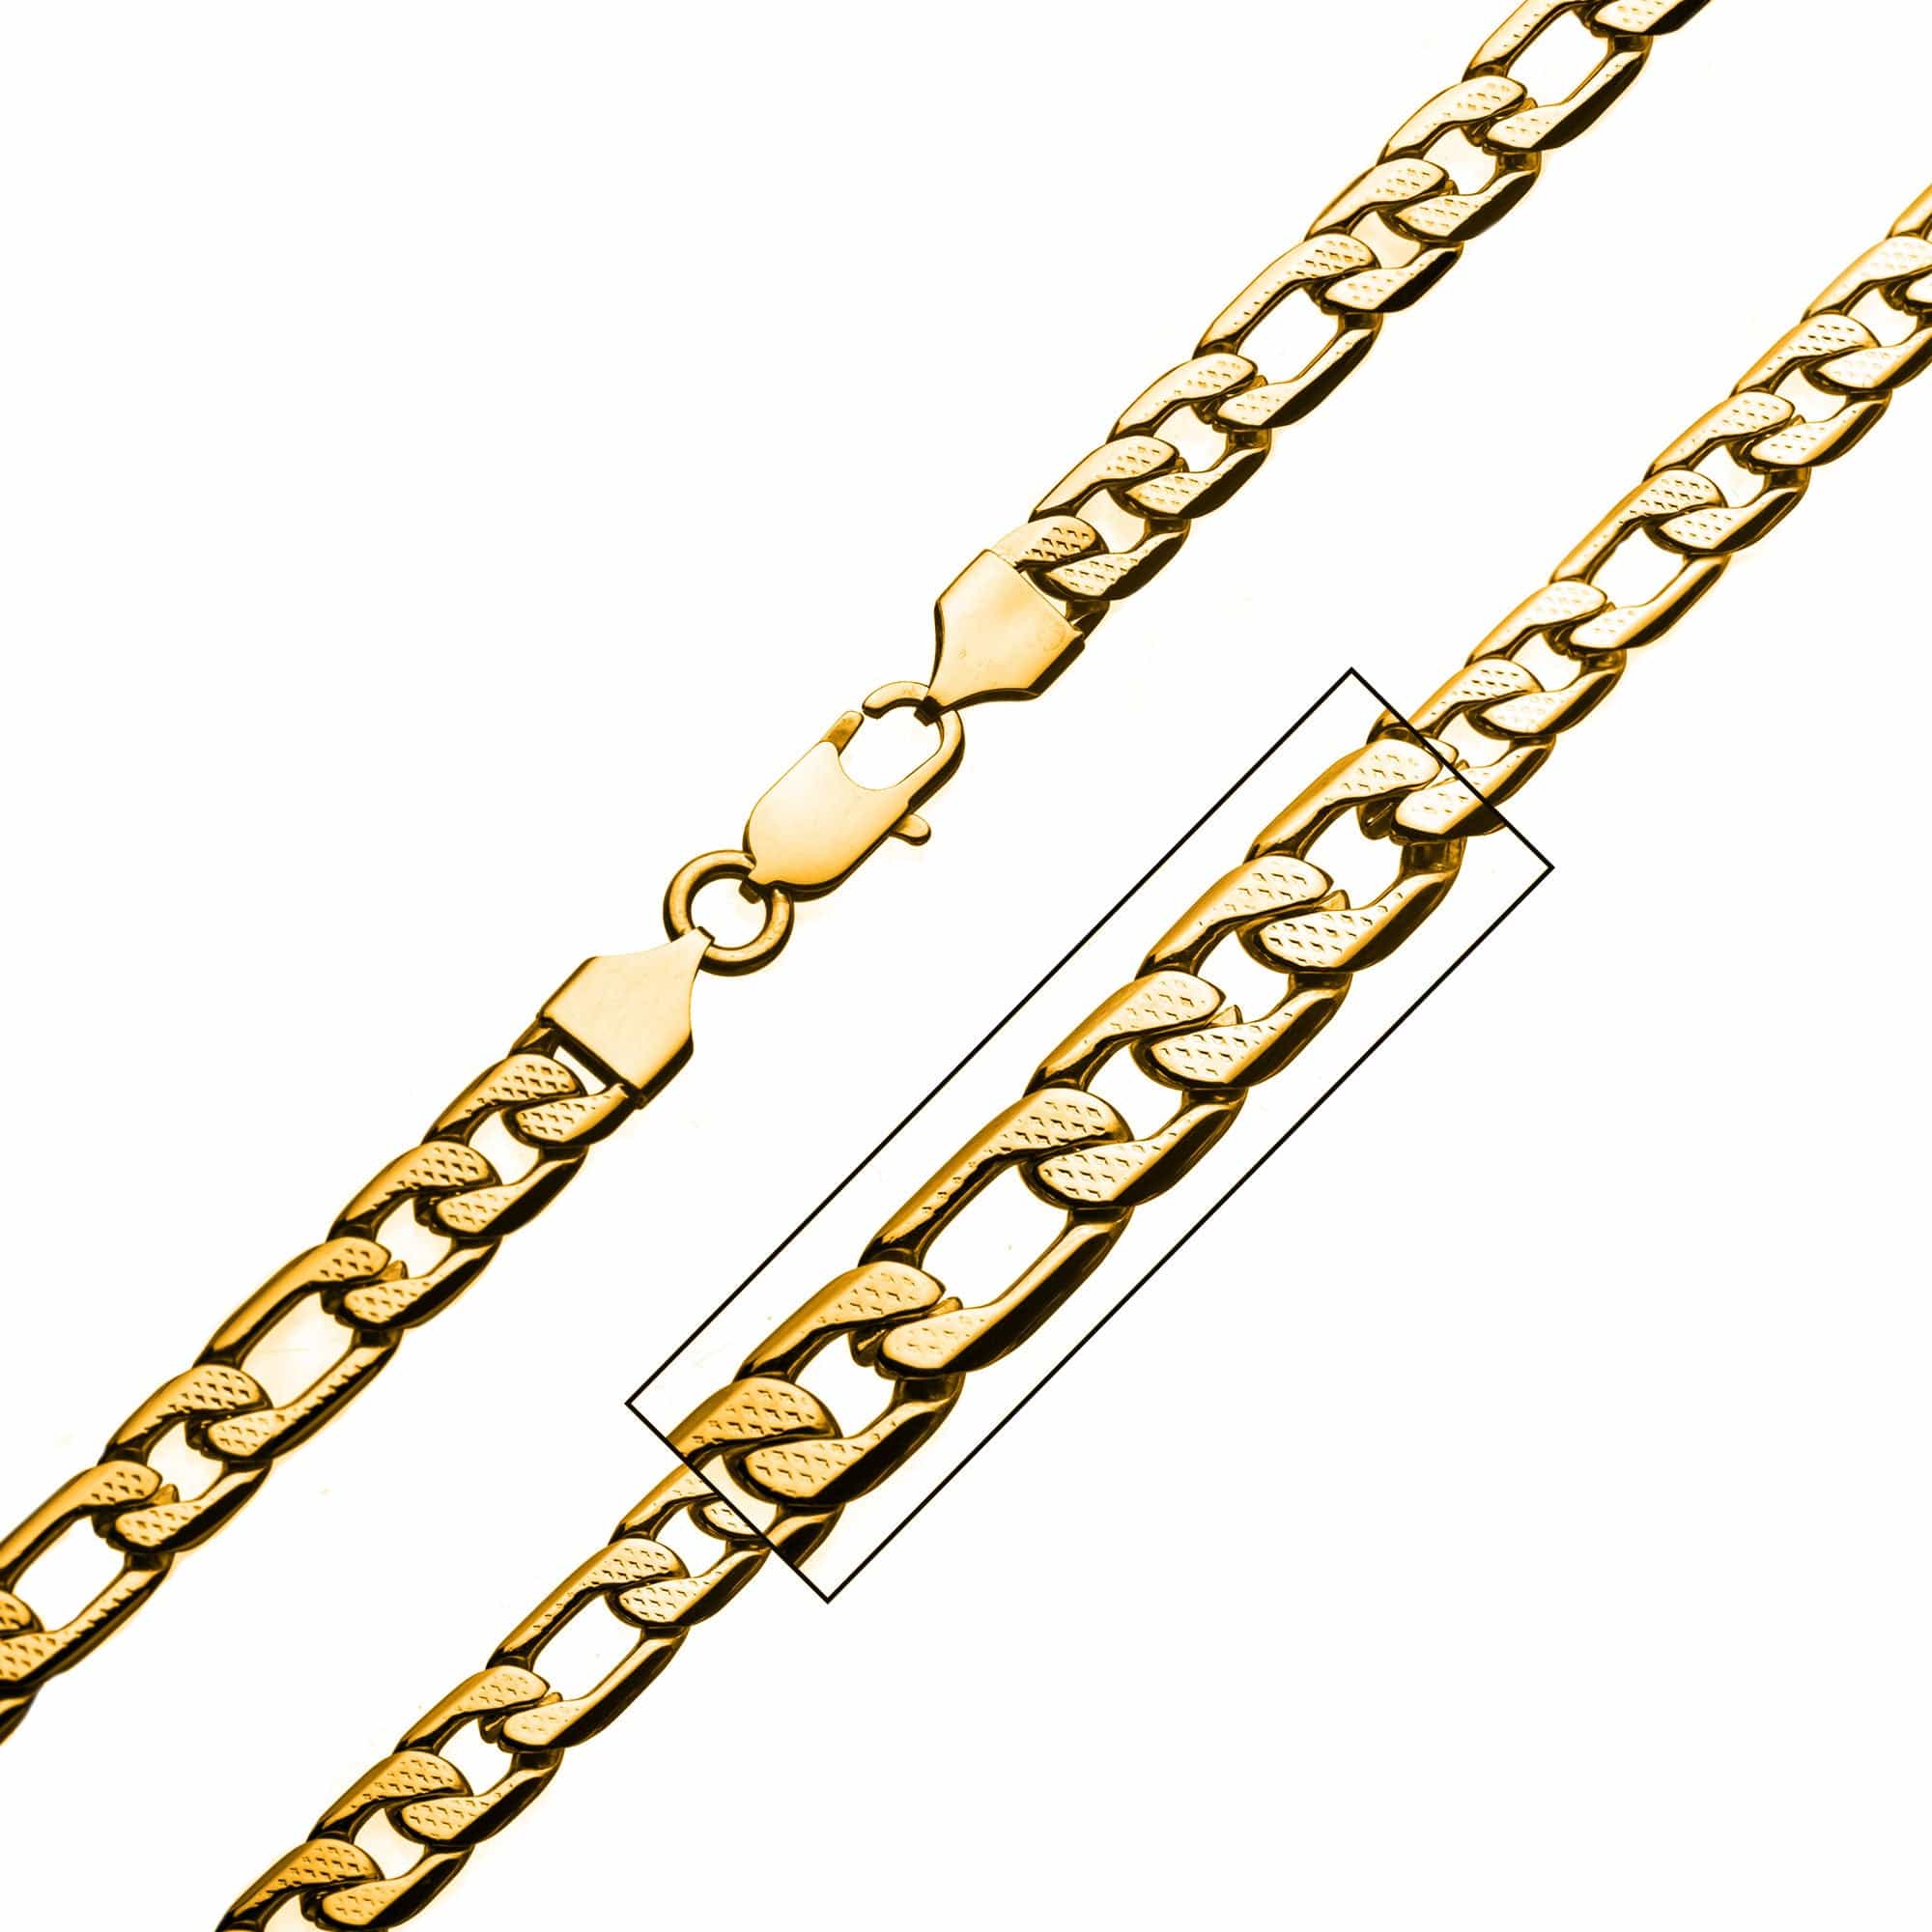 INOX JEWELRY Chains Gold Stainless Steel 7mm Speckled Pattern Figaro Chain NSTC0875GP-22